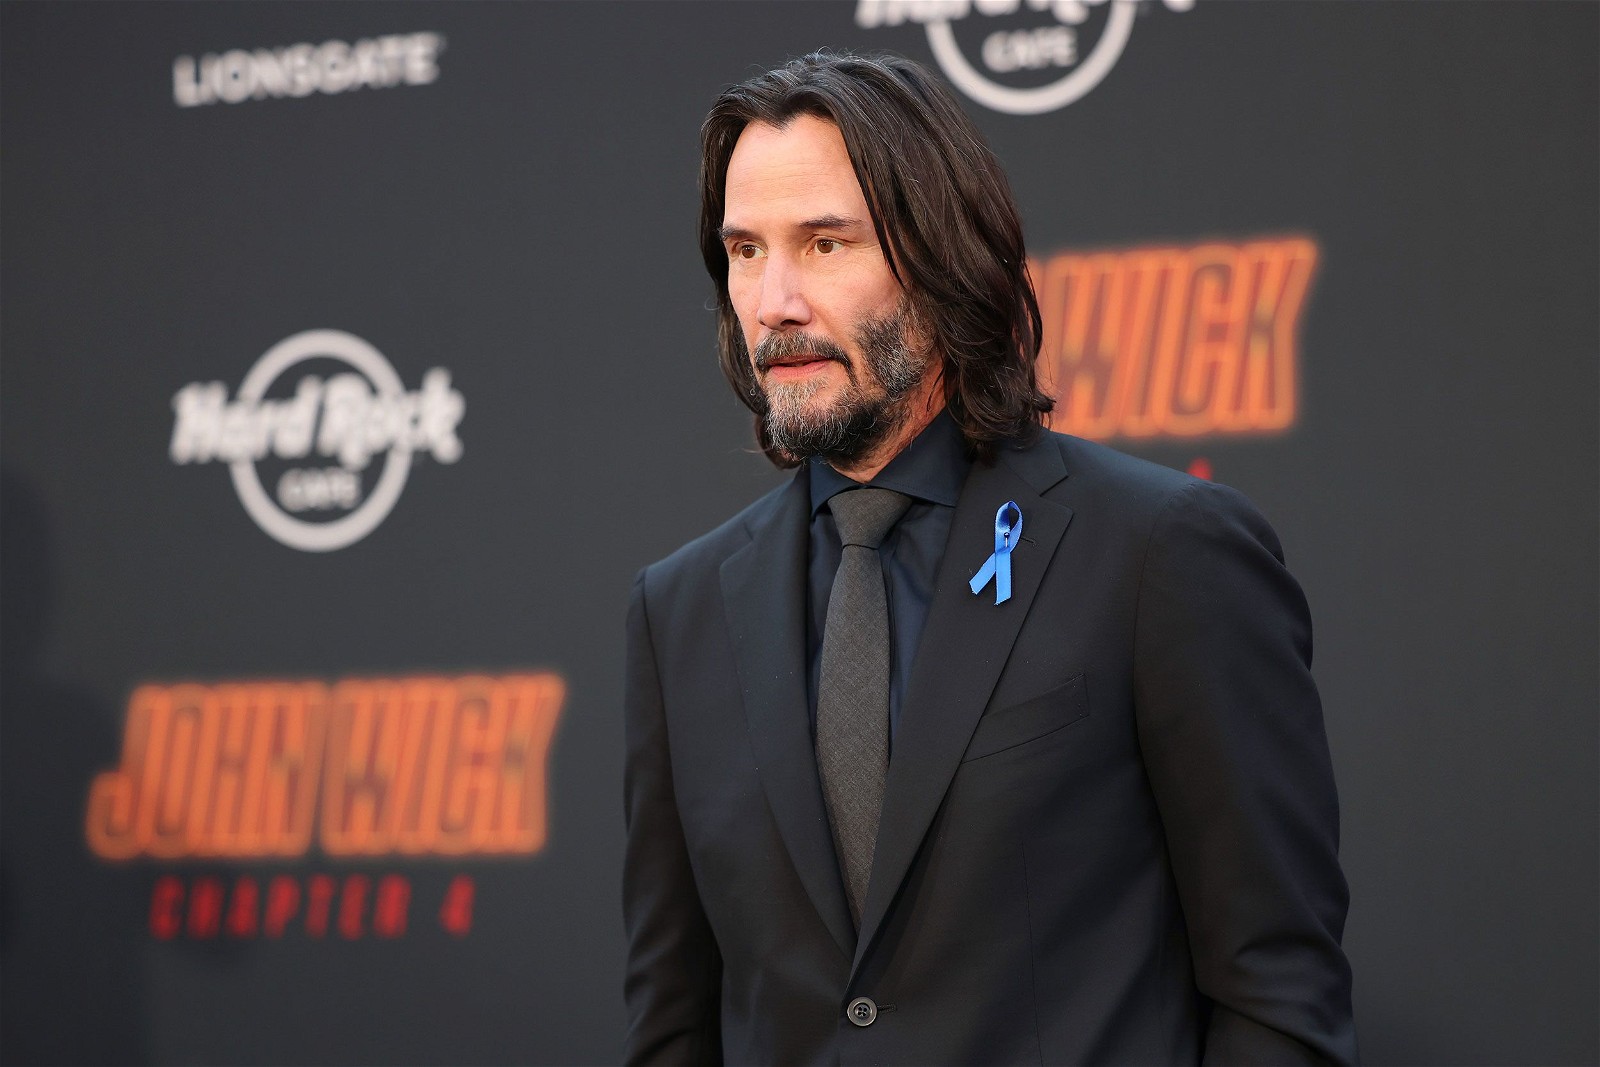 Keanu Reeves at the premiere of John Wick 4